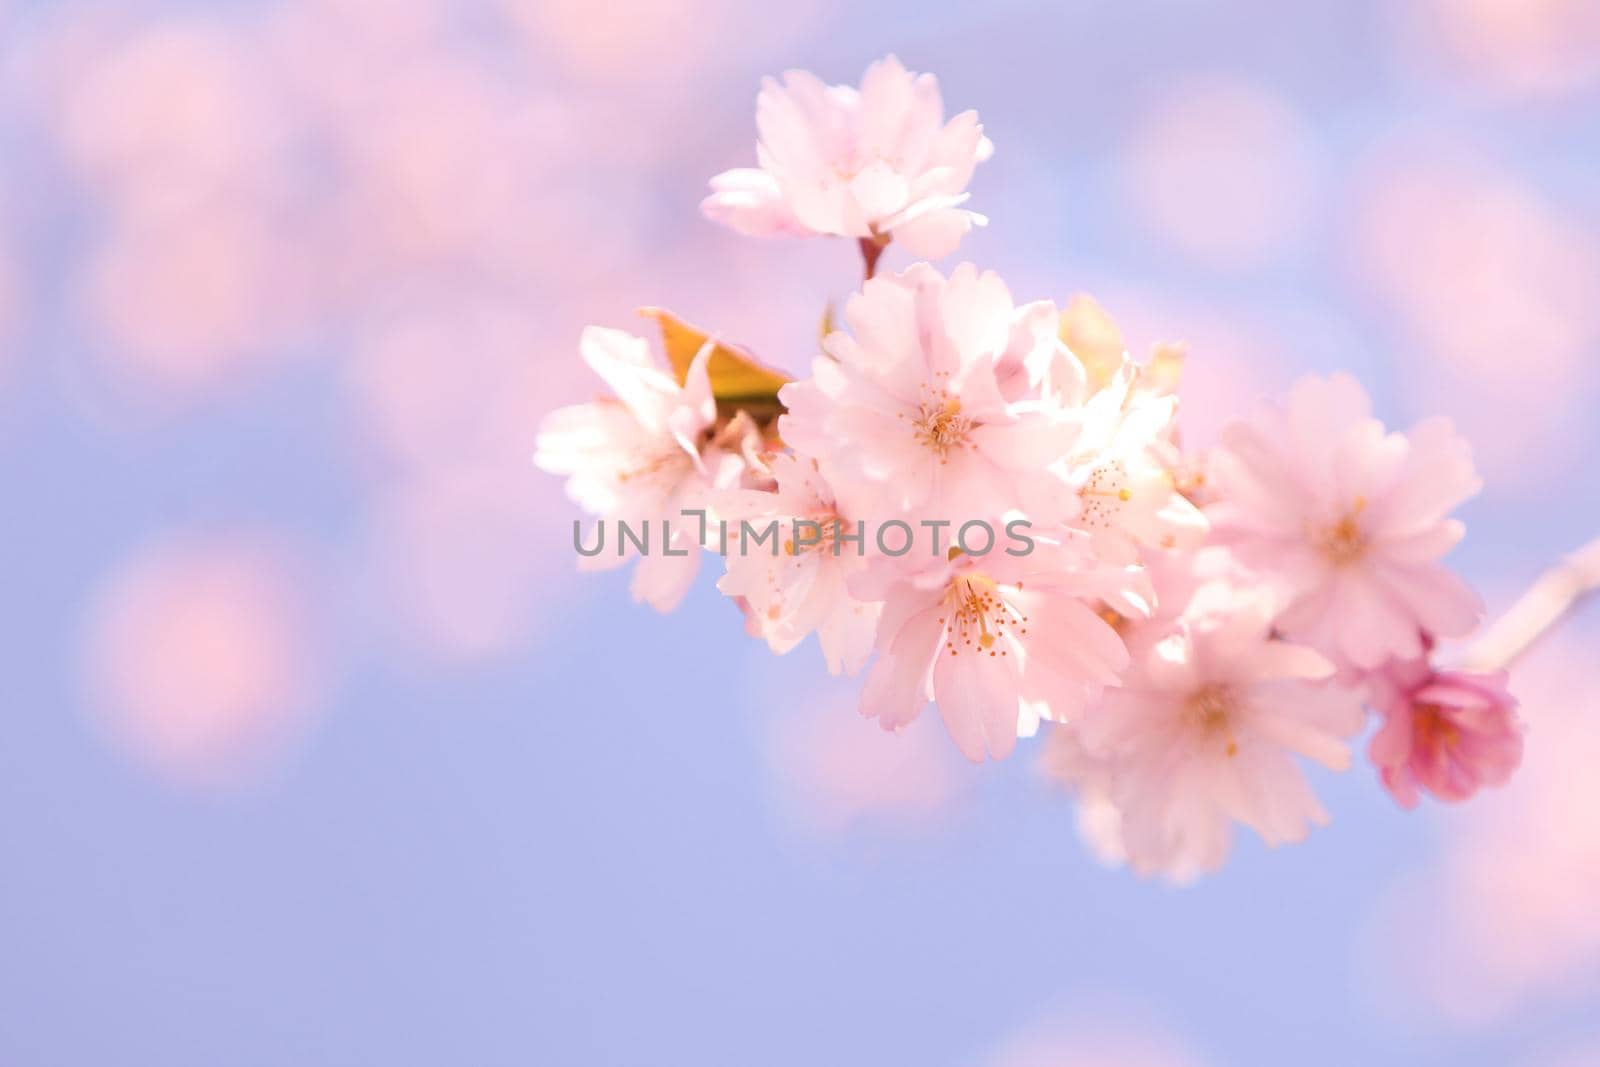 blossoming cherry flowers at spring time. Abstract soft background with cherry blossom and sunlight in shot. Selective focus image